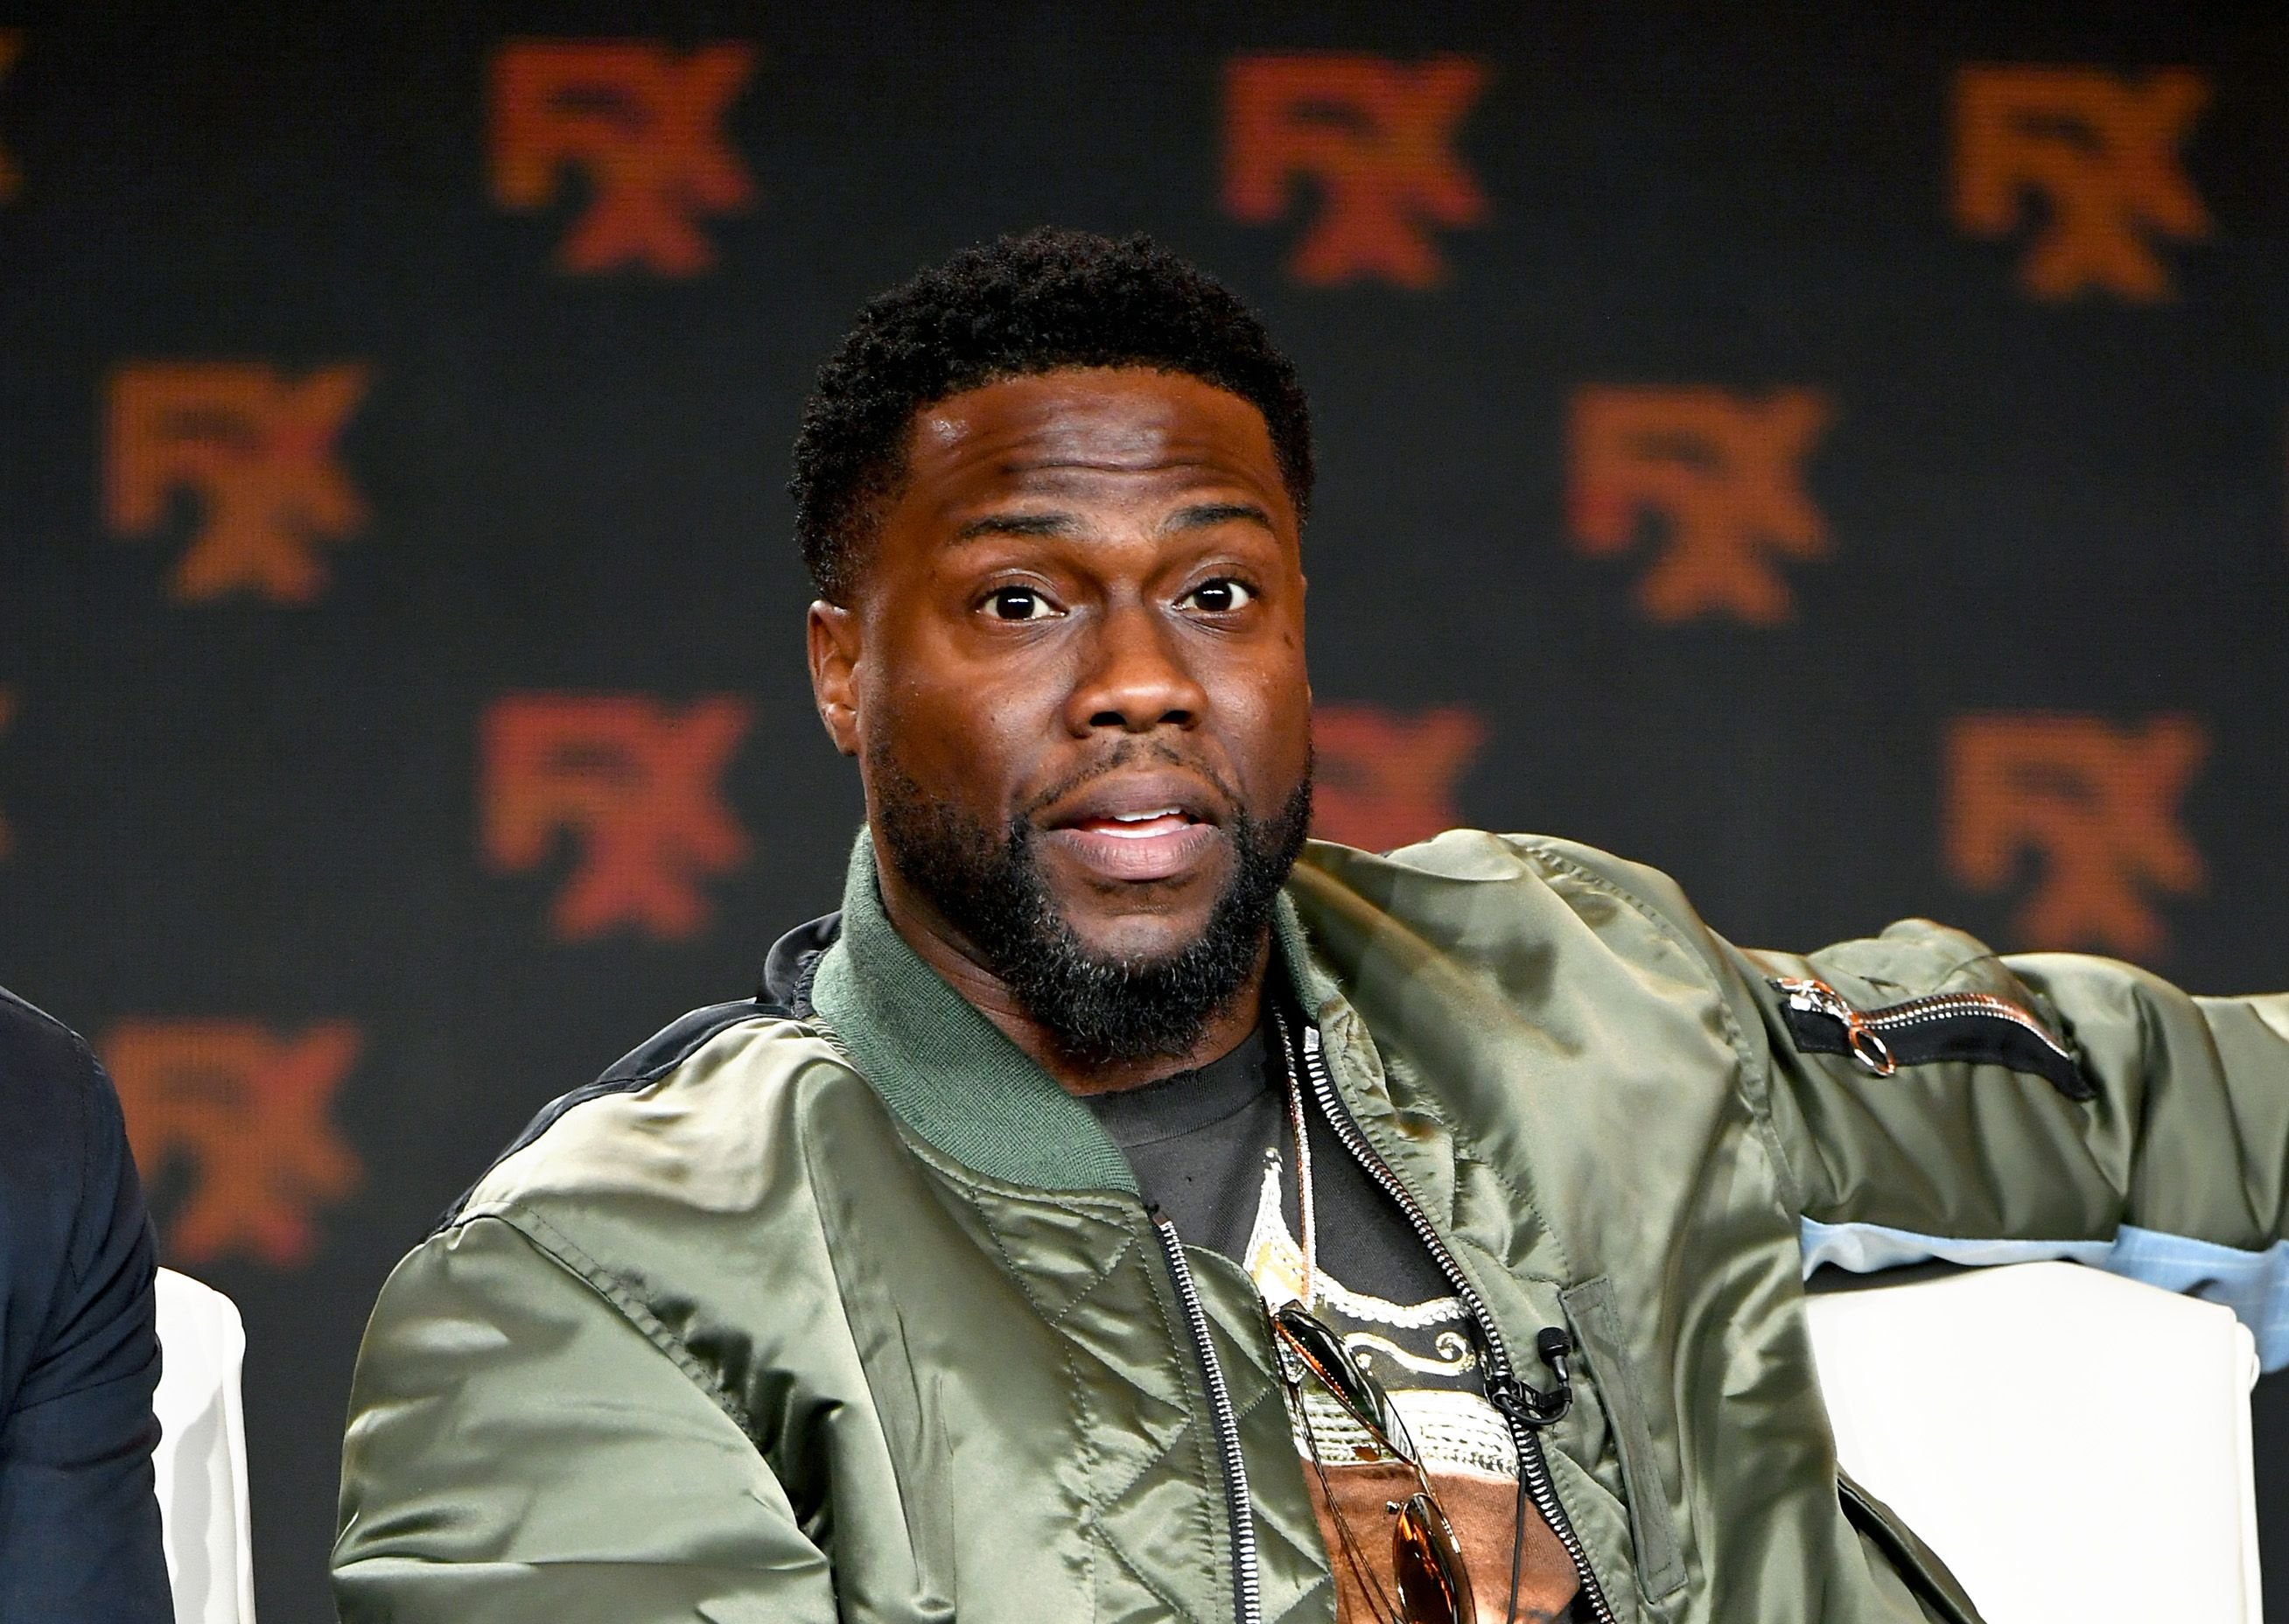 Kevin Hart speaks during the FX segment of the 2020 Winter TCA Tour at The Langham Huntington, Pasadena on January 09, 2020 in Pasadena, California. | Source: Getty Images